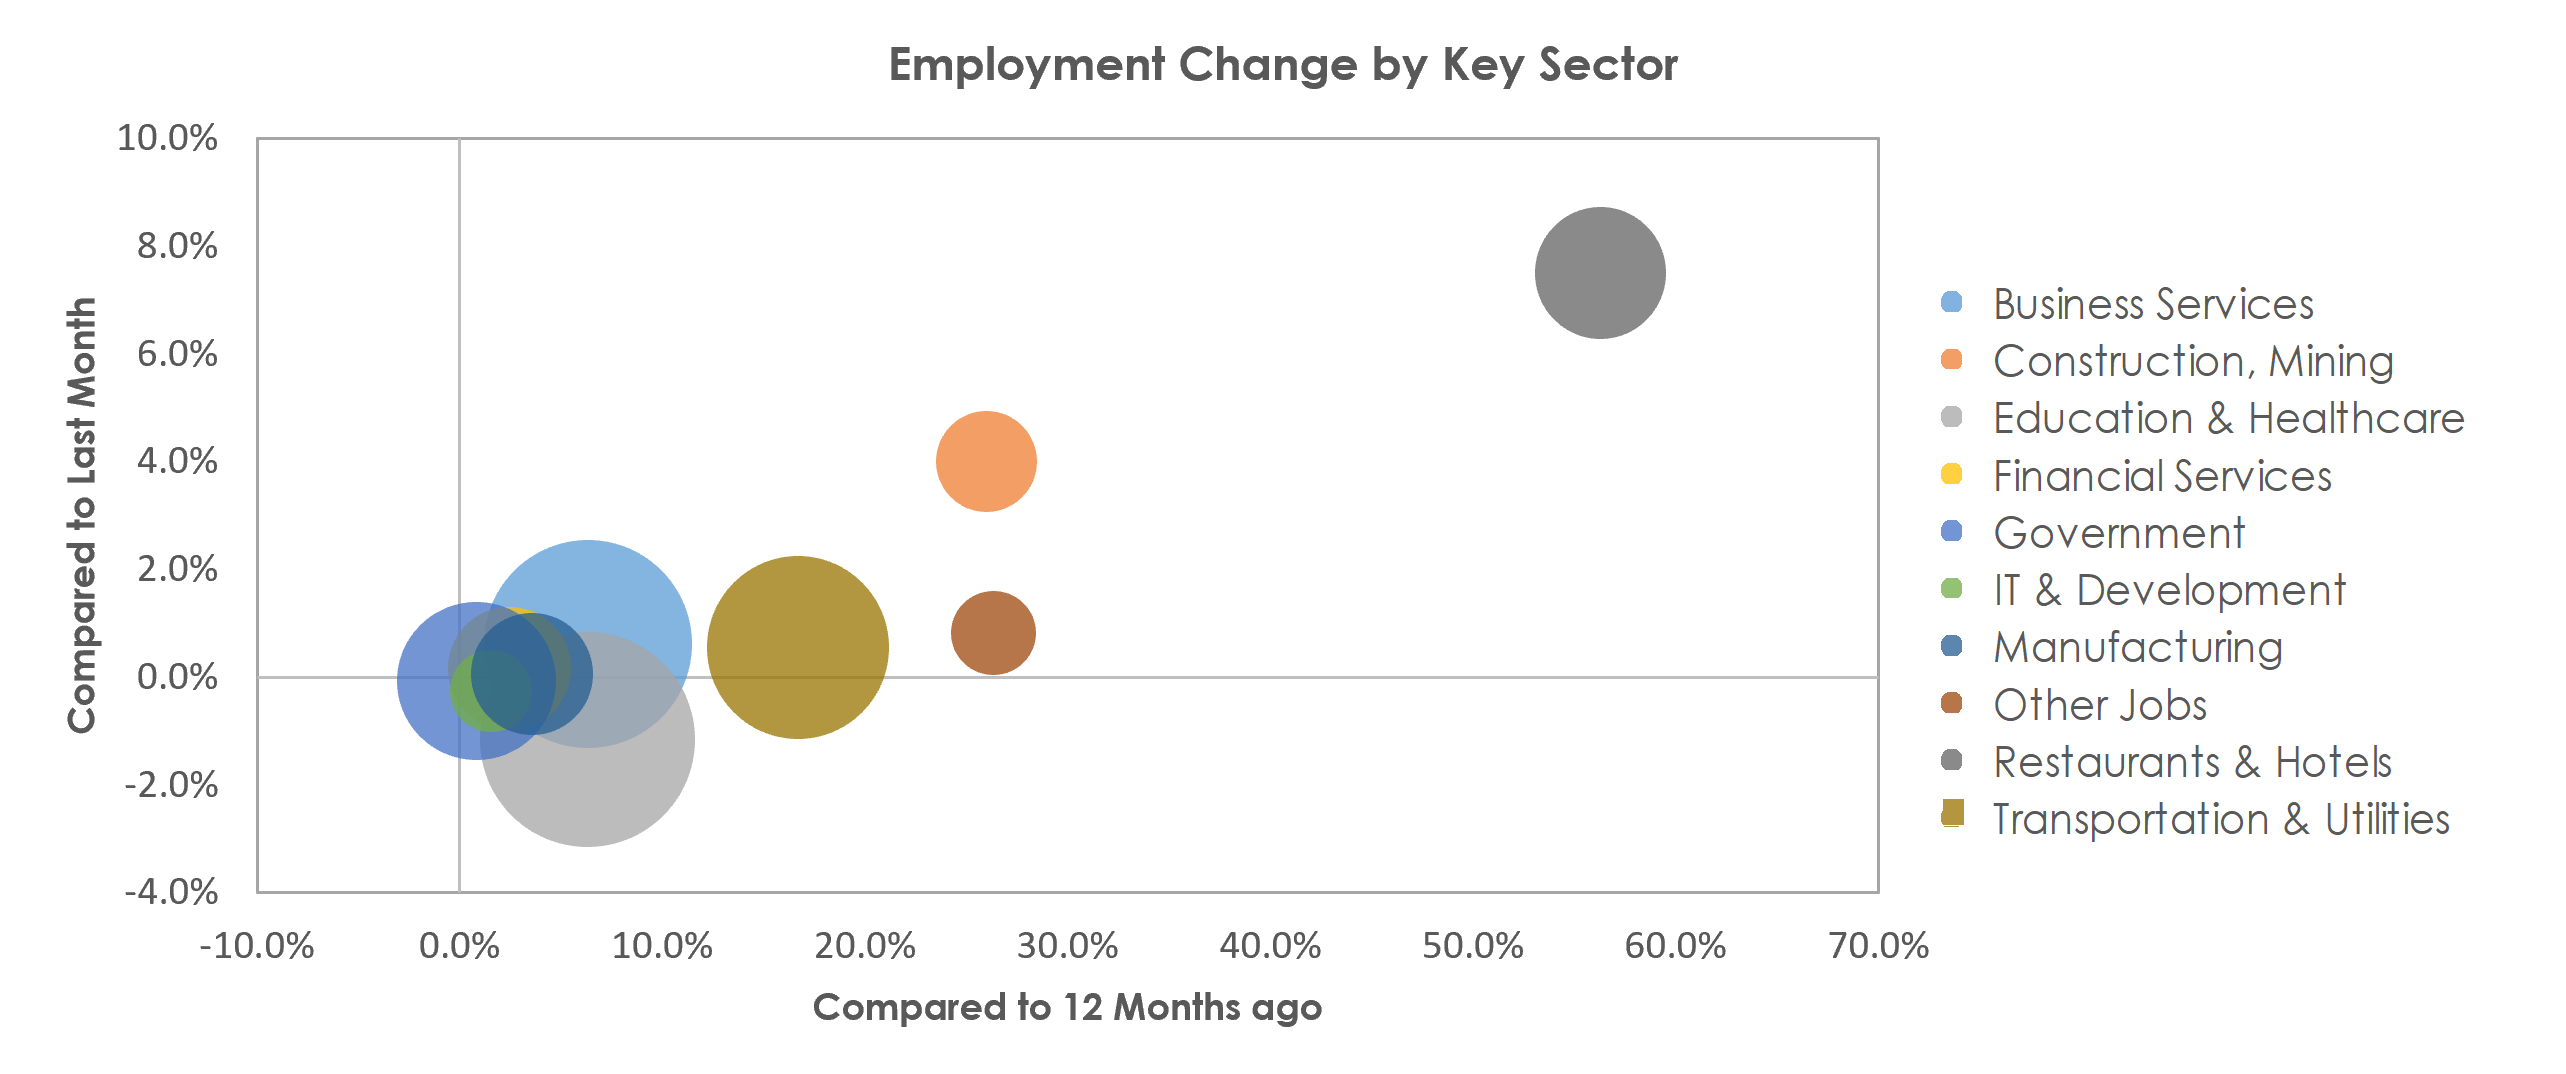 Boston-Cambridge-Nashua, MA-NH Unemployment by Industry May 2021